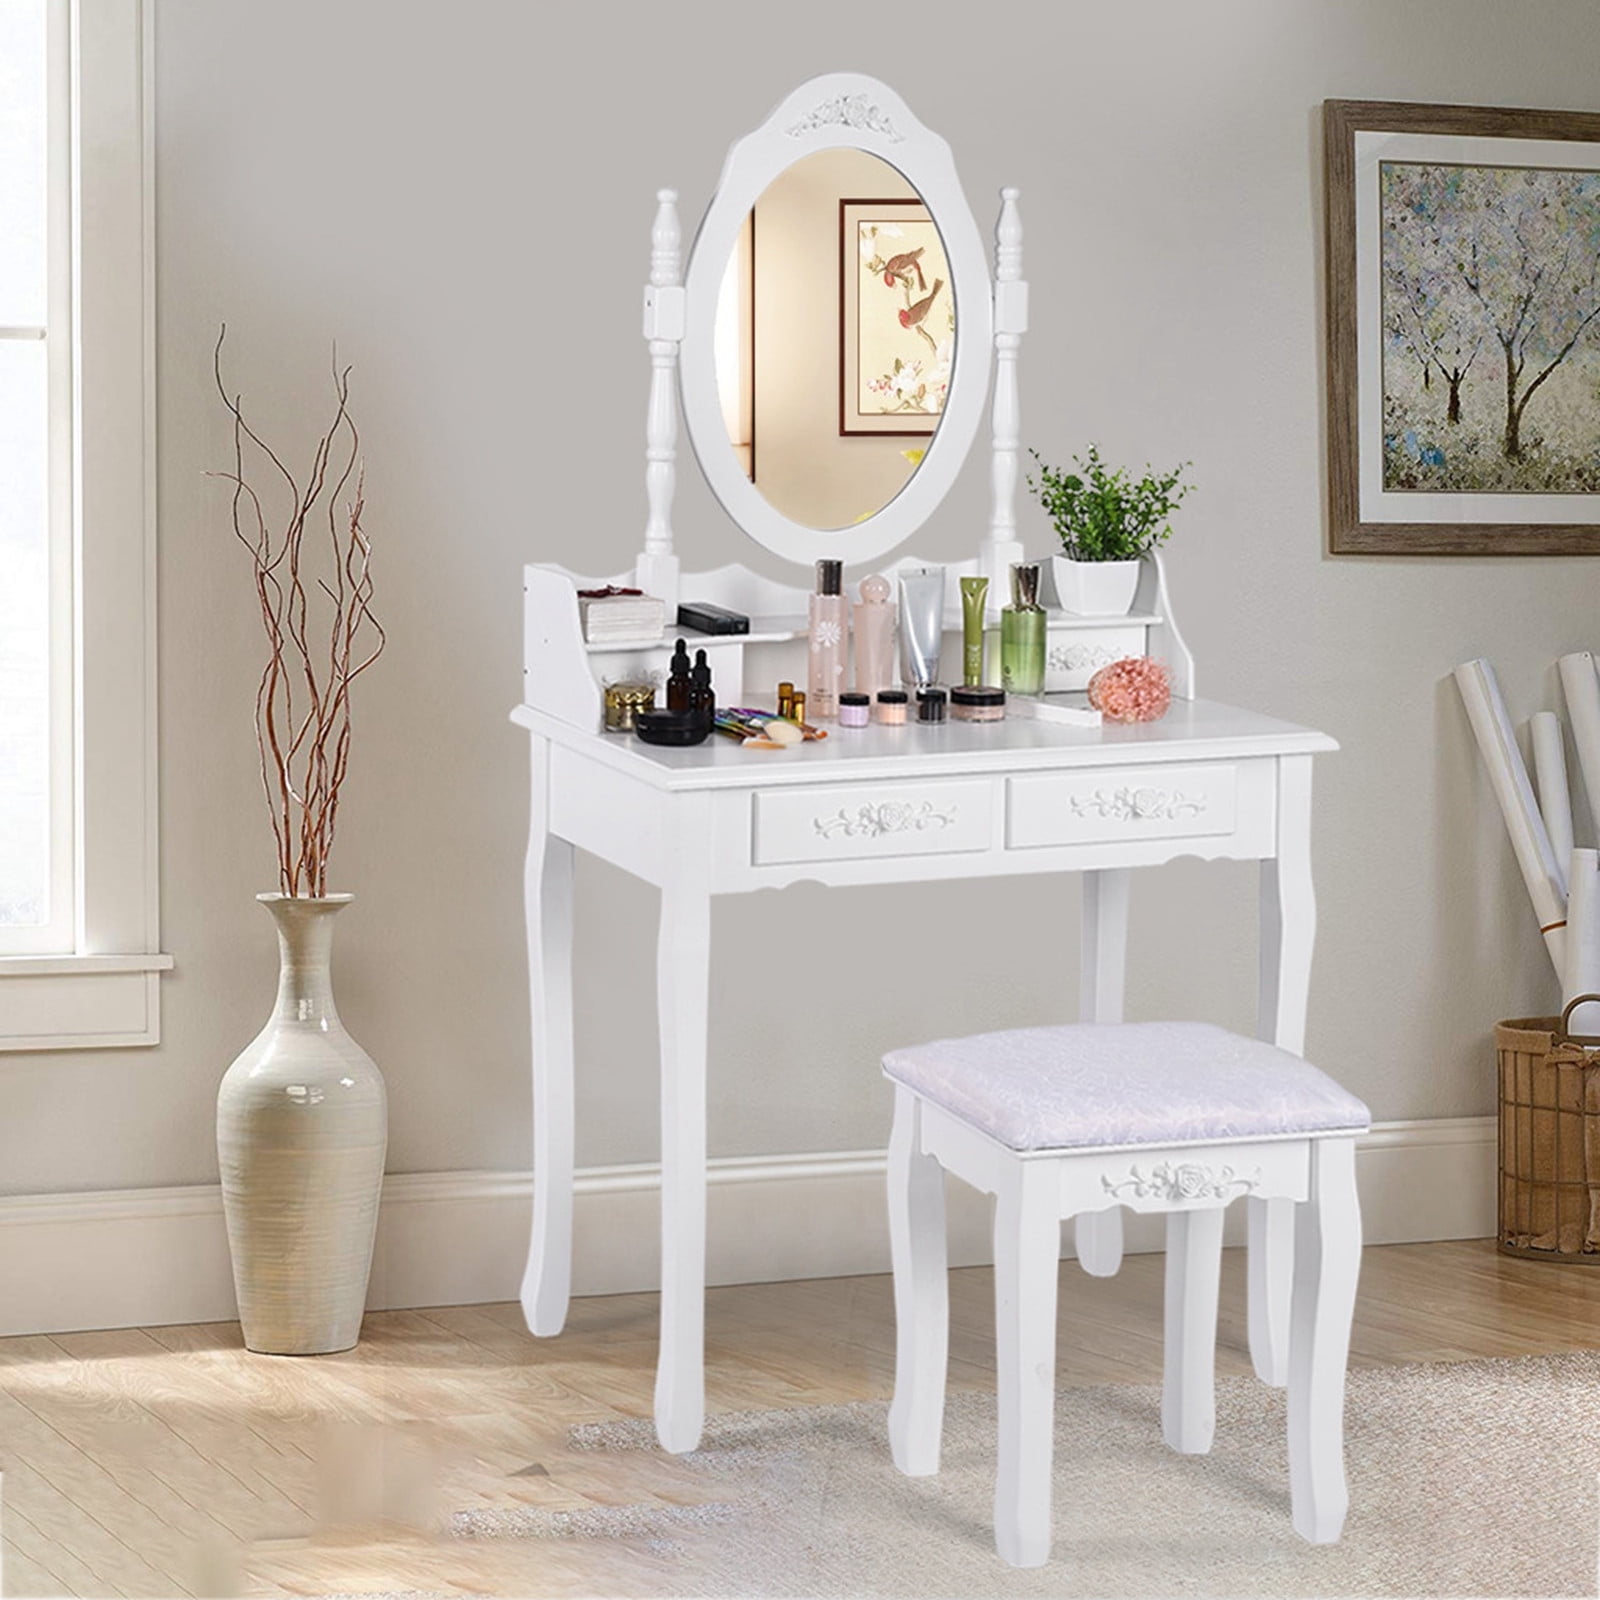 Details about   Wood Vanity Makeup Dressing Table Stool Set Bedroom With Drawer Rotating Mirror 